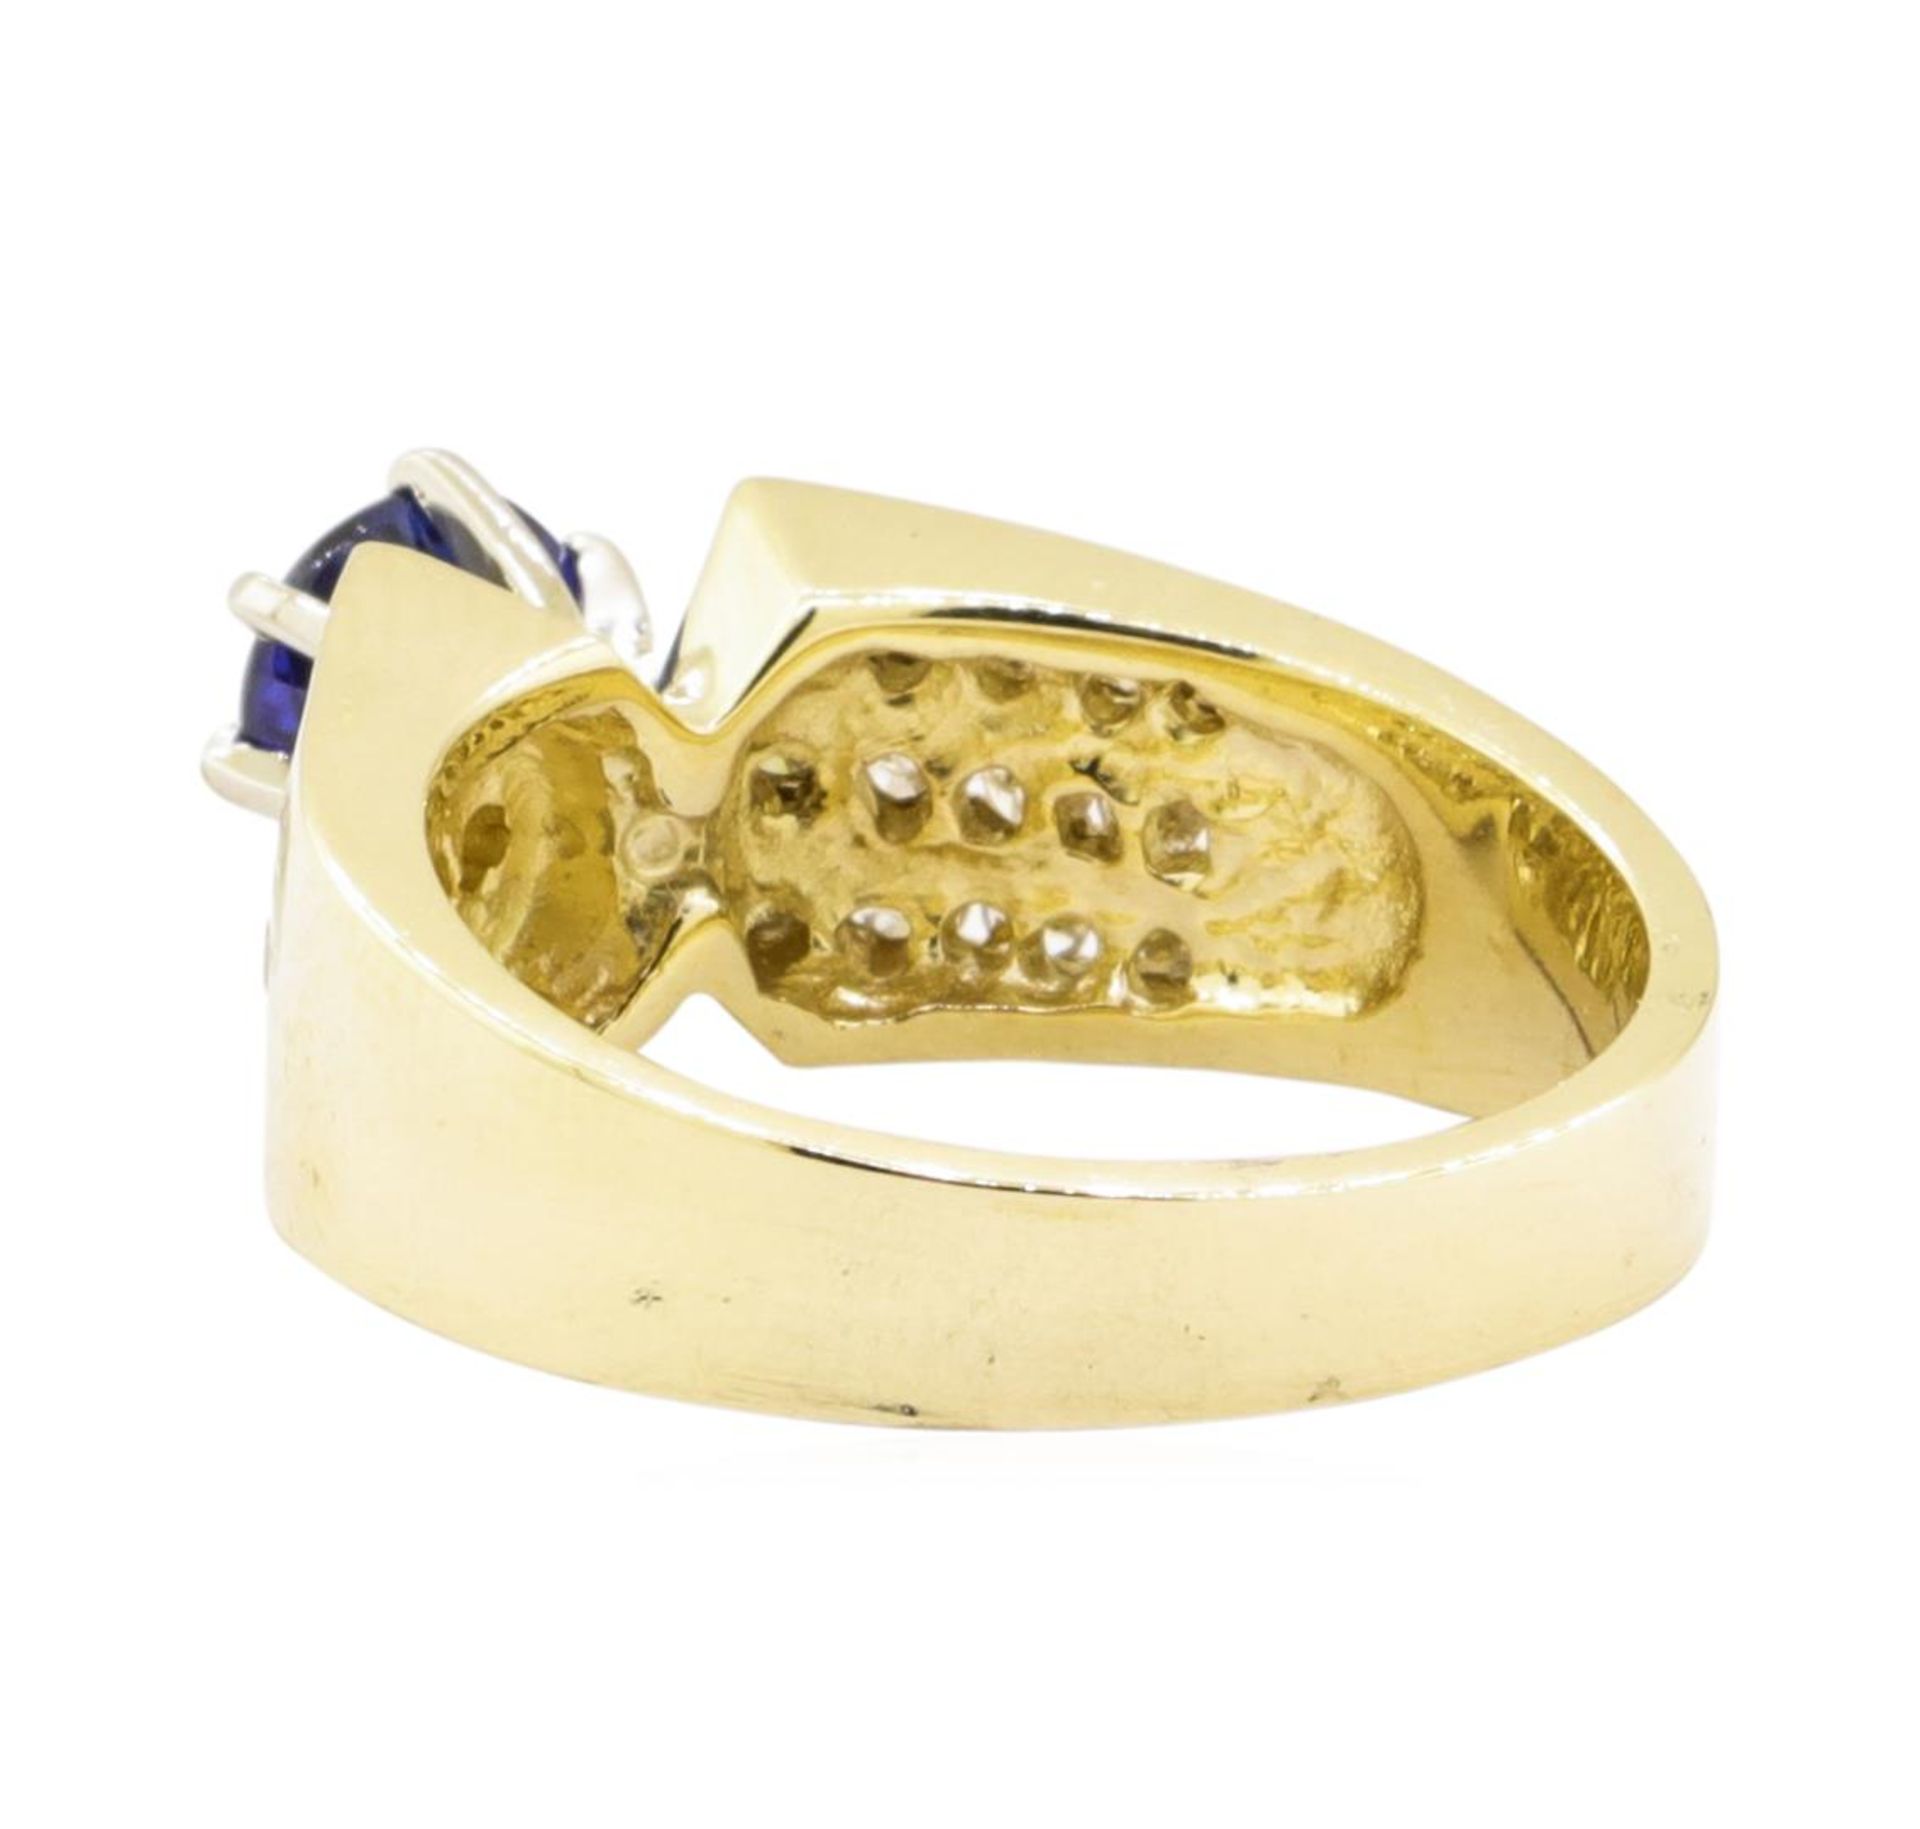 1.44 ctw Blue Sapphire And Diamond Ring - 14KT Yellow Gold - Image 3 of 5